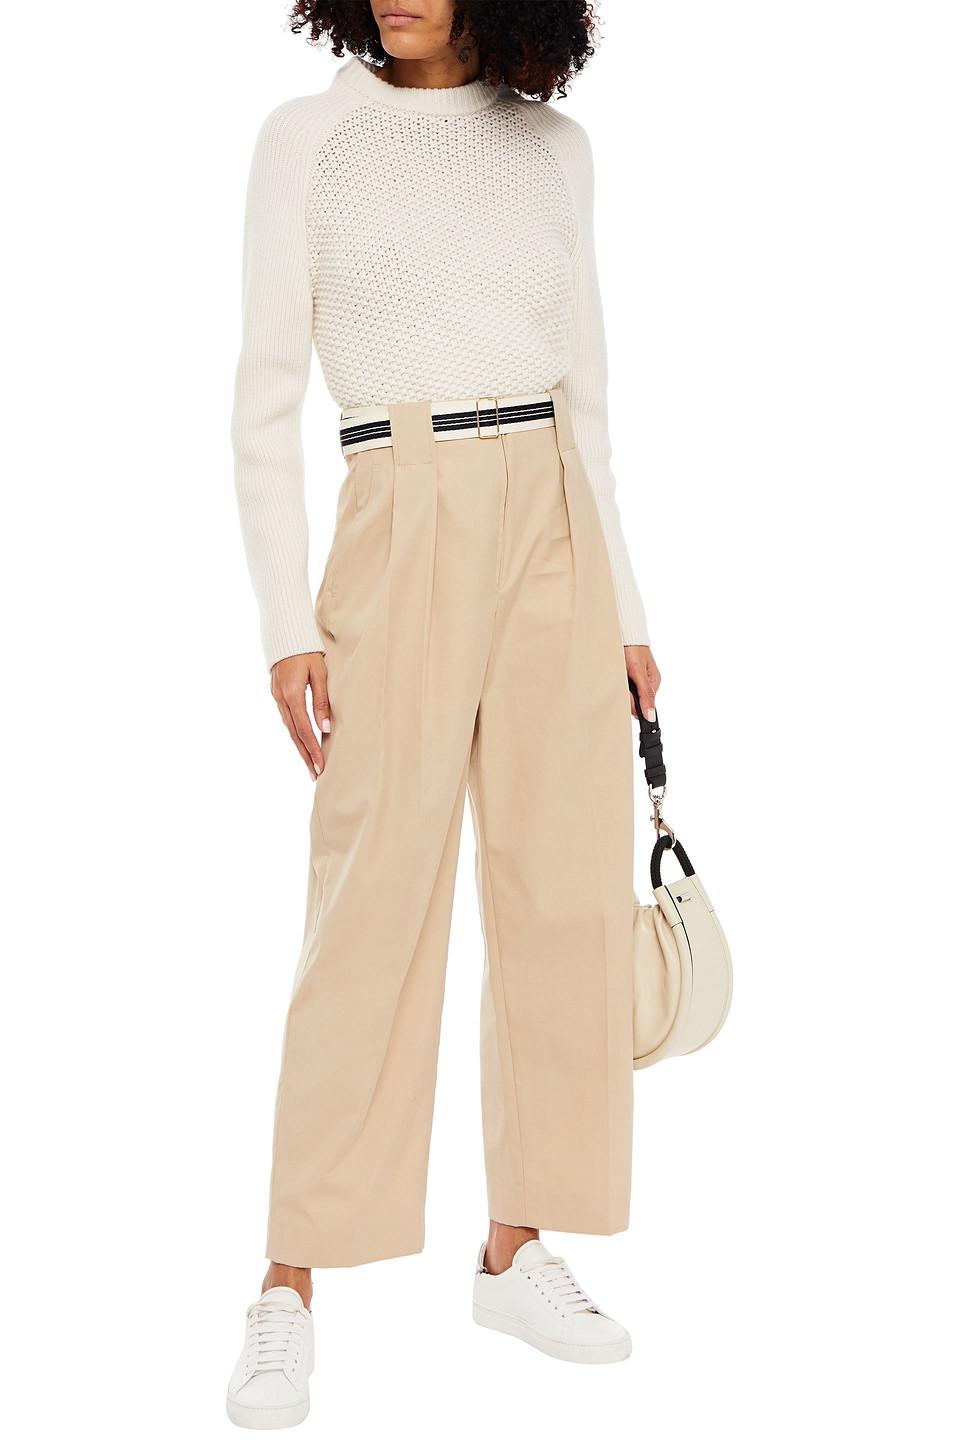 Sandro Nylo Belted Pleated Cotton-twill Wide-leg Pants in Natural | Lyst